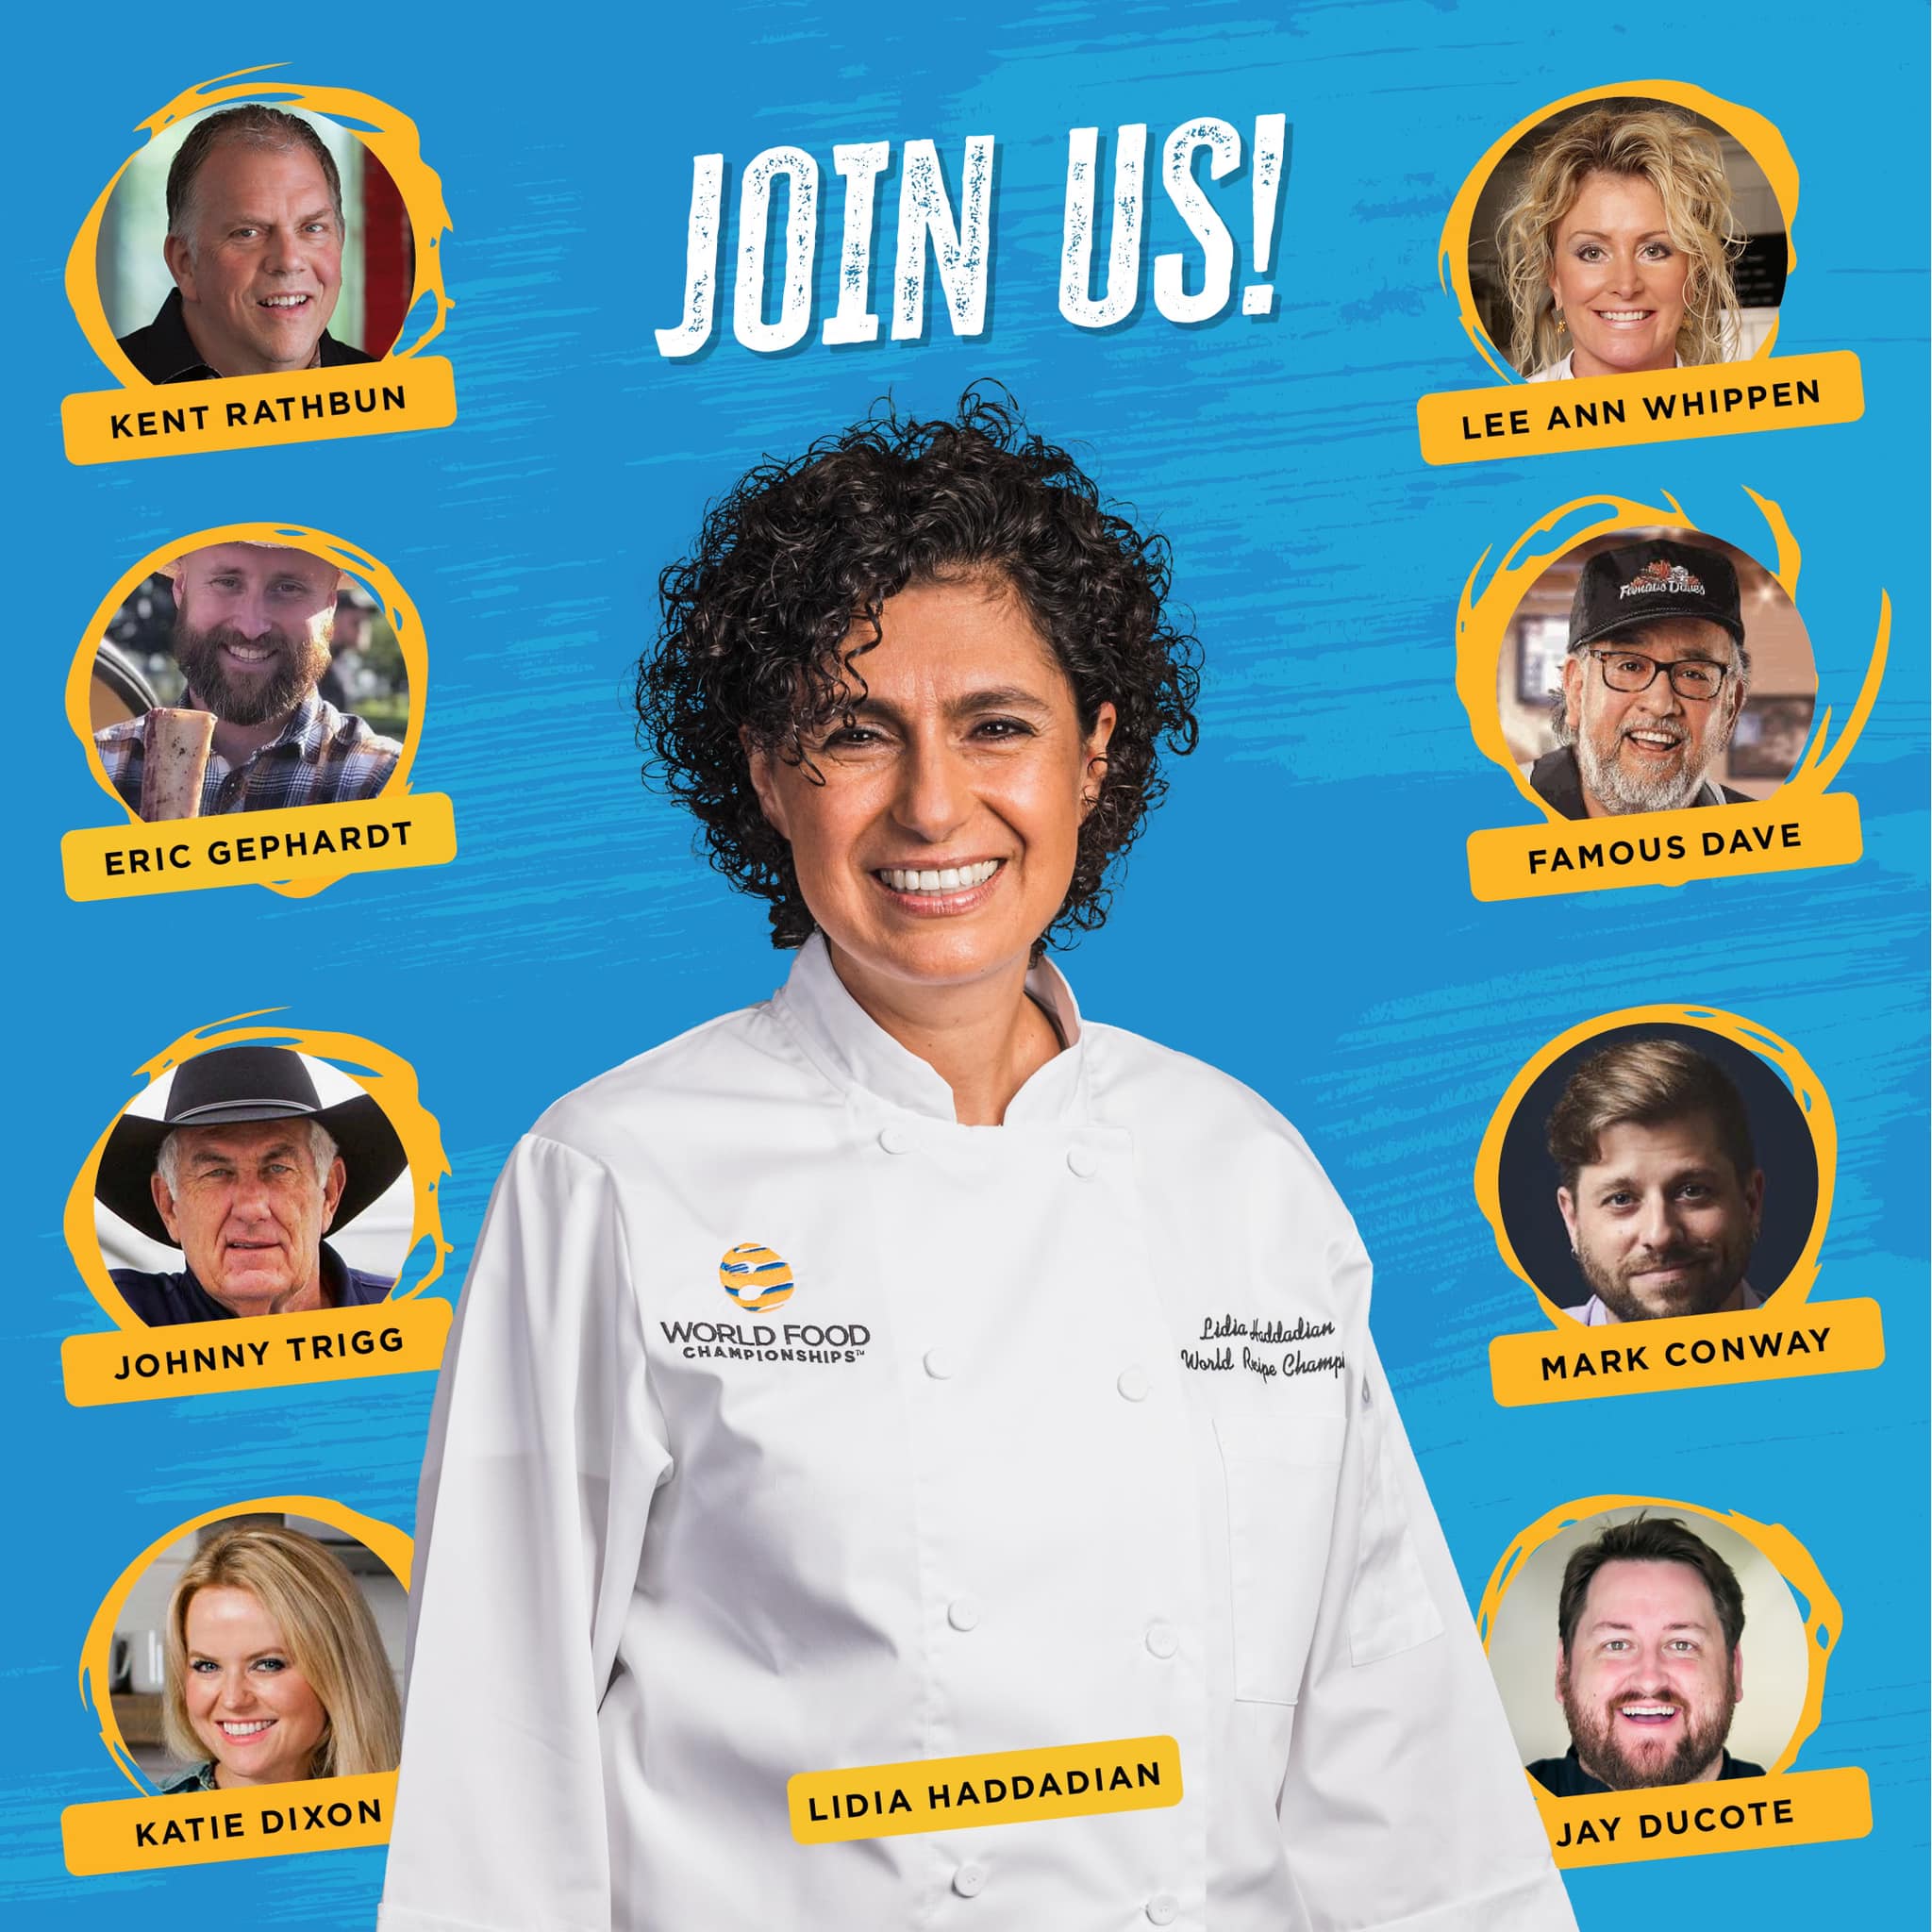 The Leader in Food Sport is Bringing The Stars to The Lonestar State